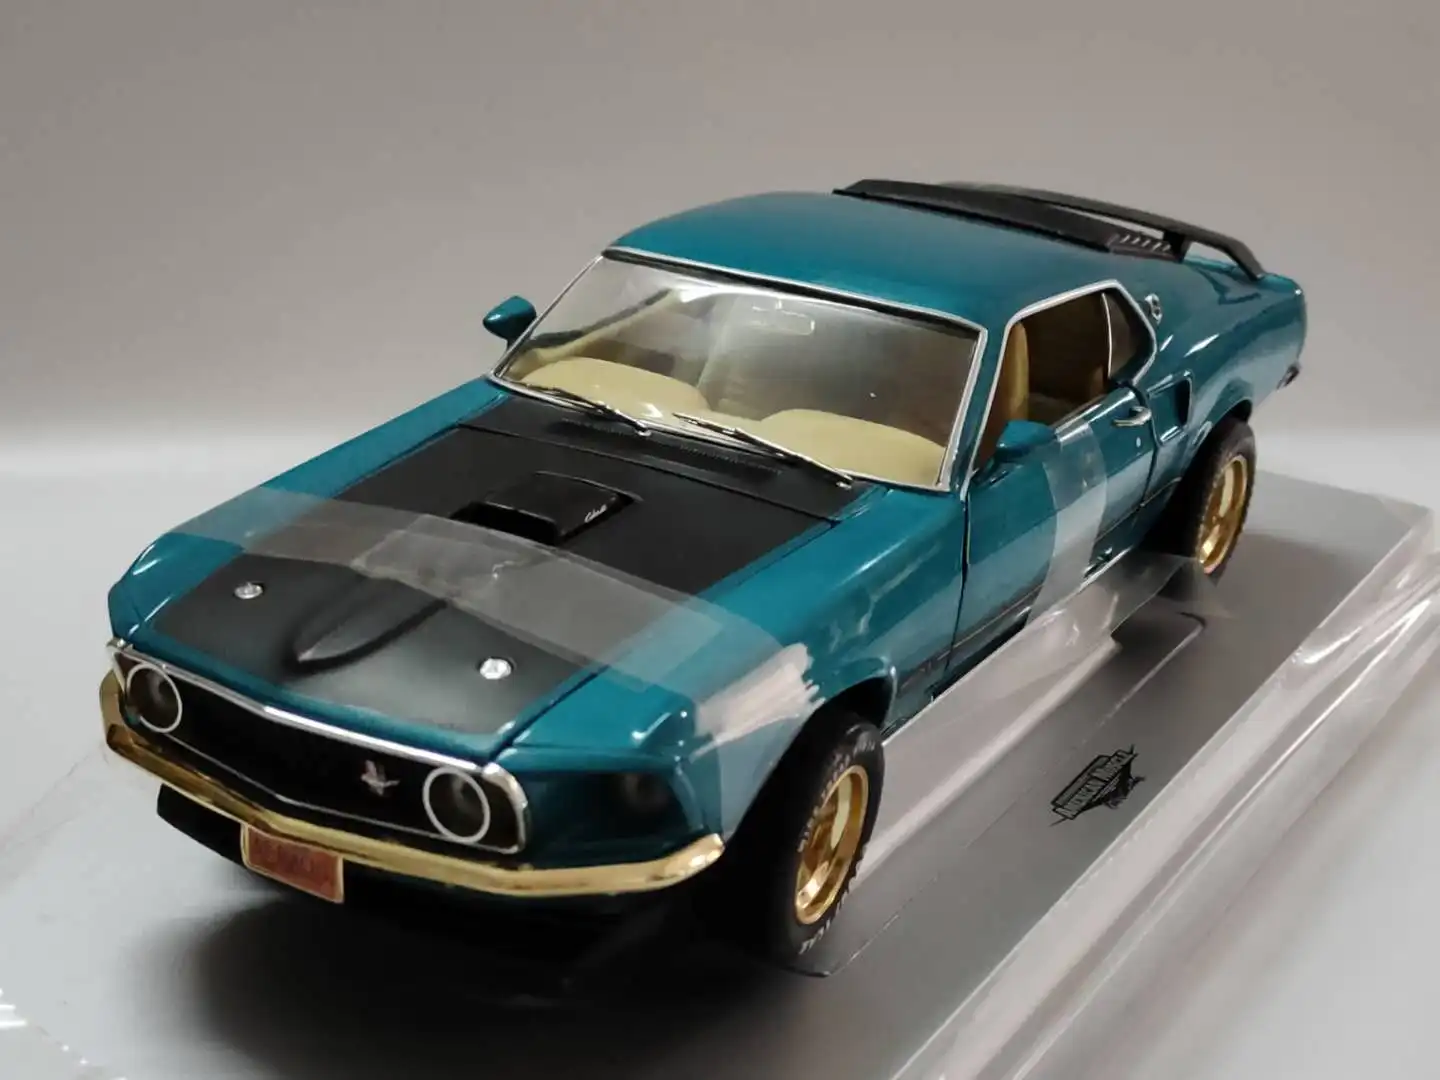 

ERTL 1:18 Mustang Mach 1969 Vintage Car Alloy Fully Open Simulation Limited Edition Alloy Metal Static Car Toy Gift